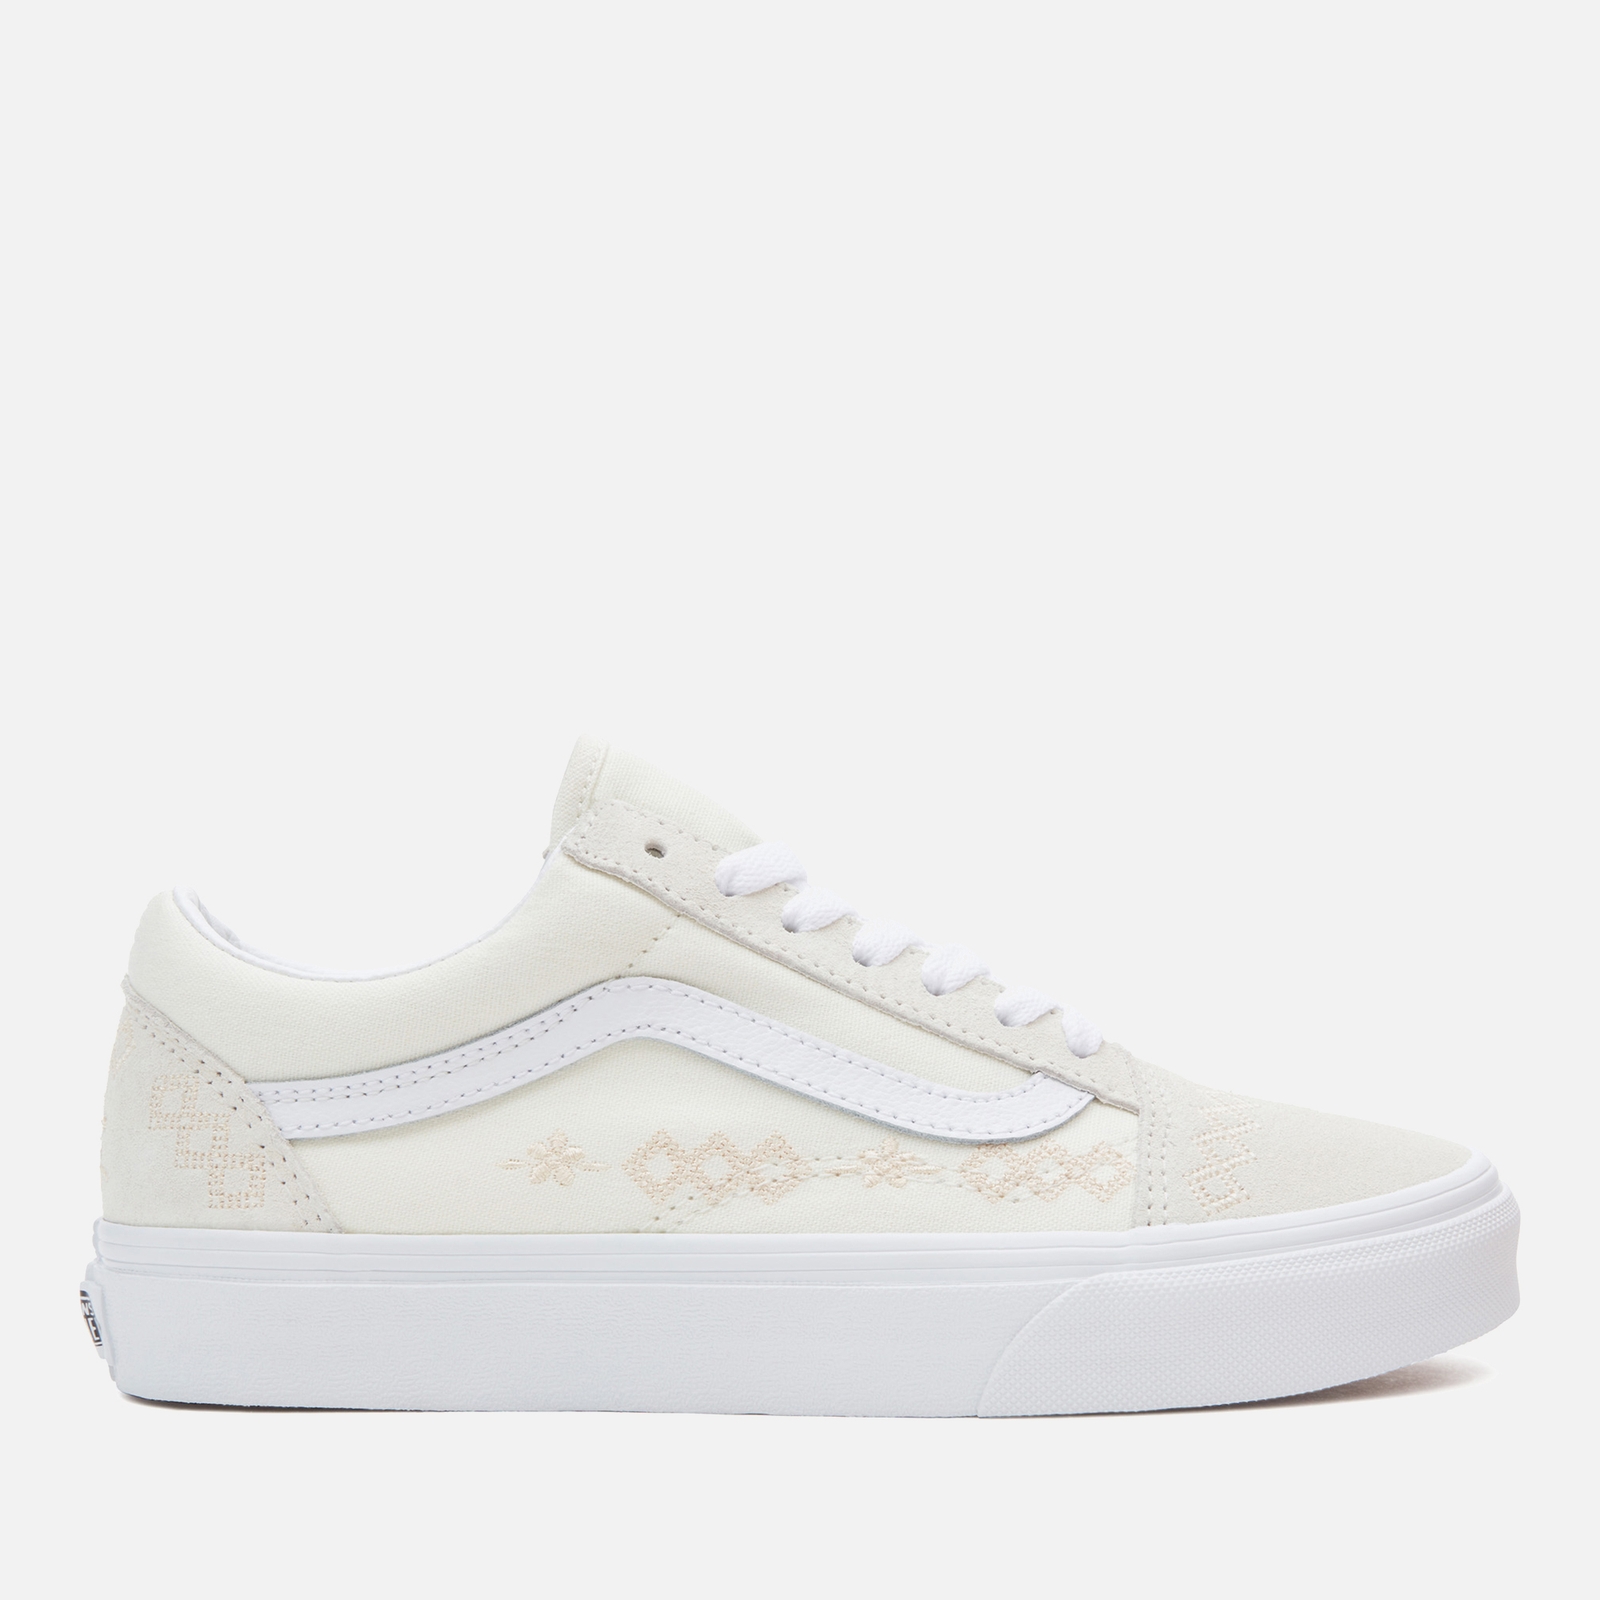 Vans Women's Old Skool Trainers - Craftcore Marshmallow